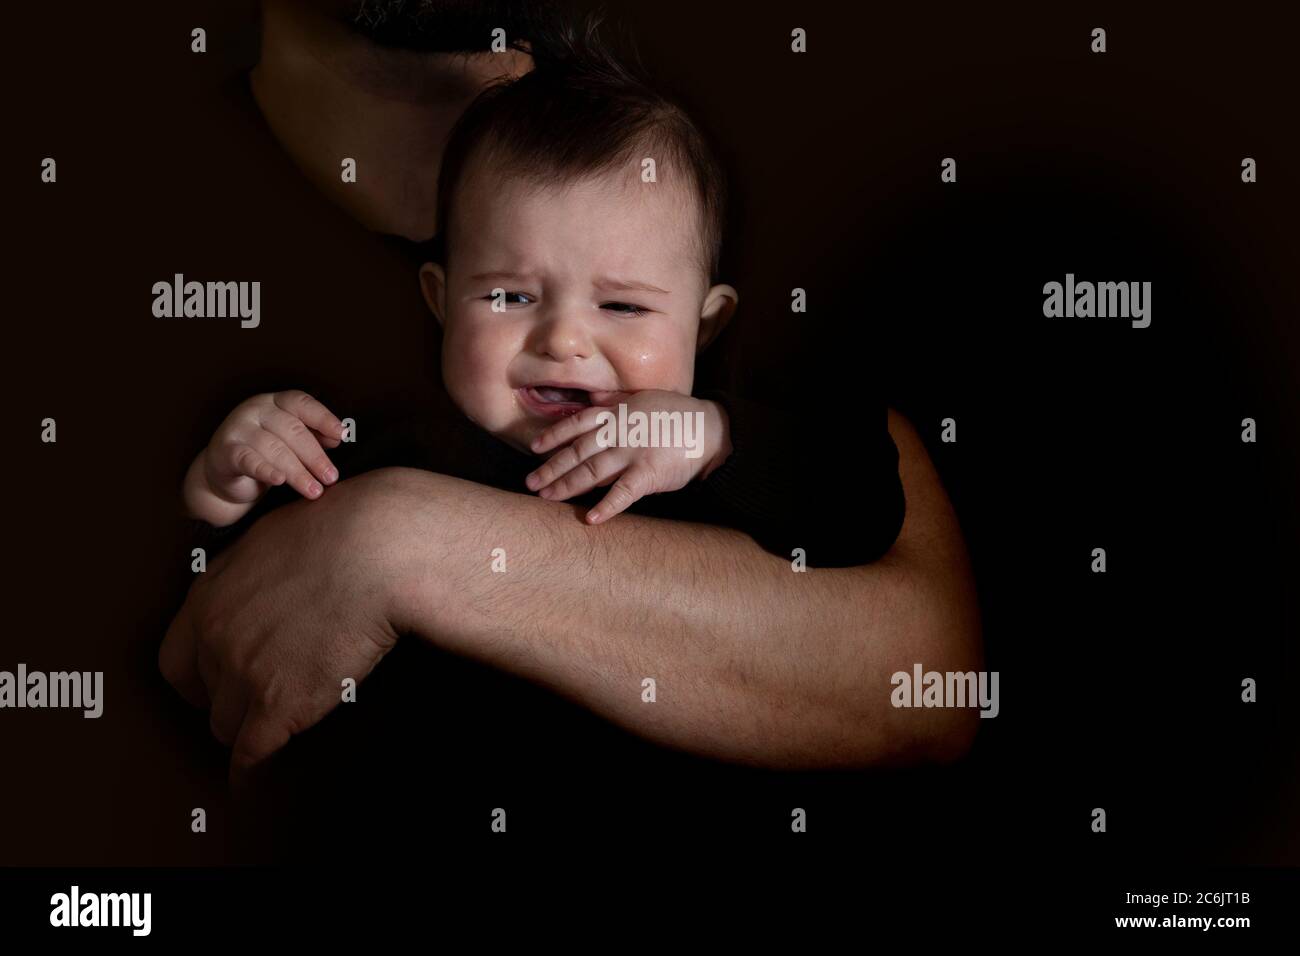 men's hands holding crying baby in the black suit on the black background. Stock Photo